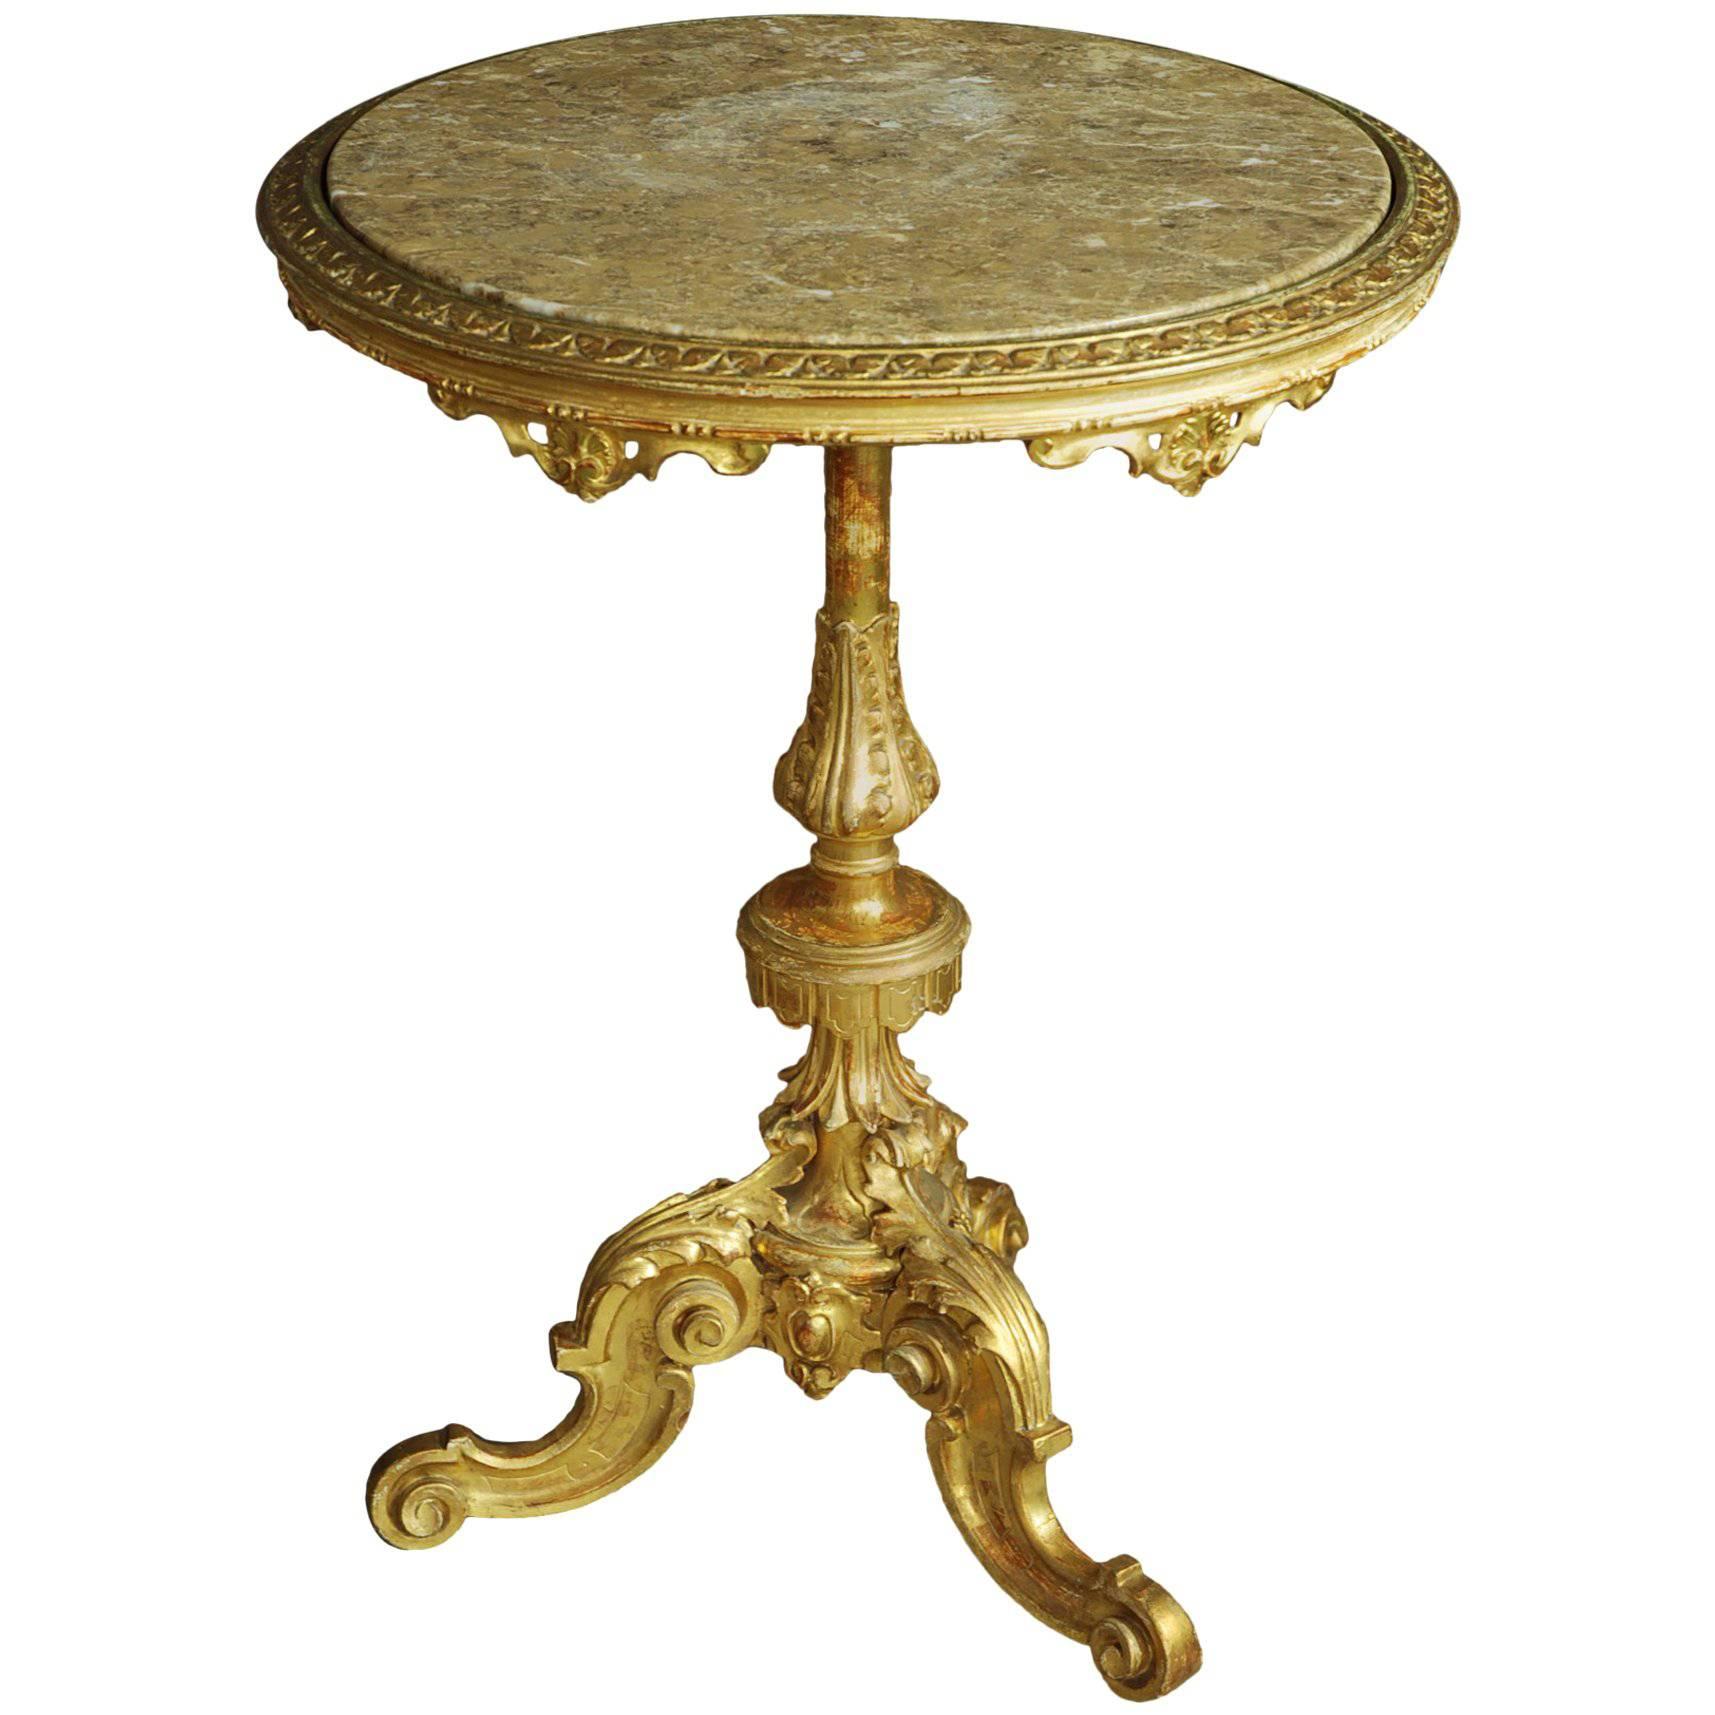 Decorative Late 19th Century Italian Carved Giltwood Marble-Top Centre Table